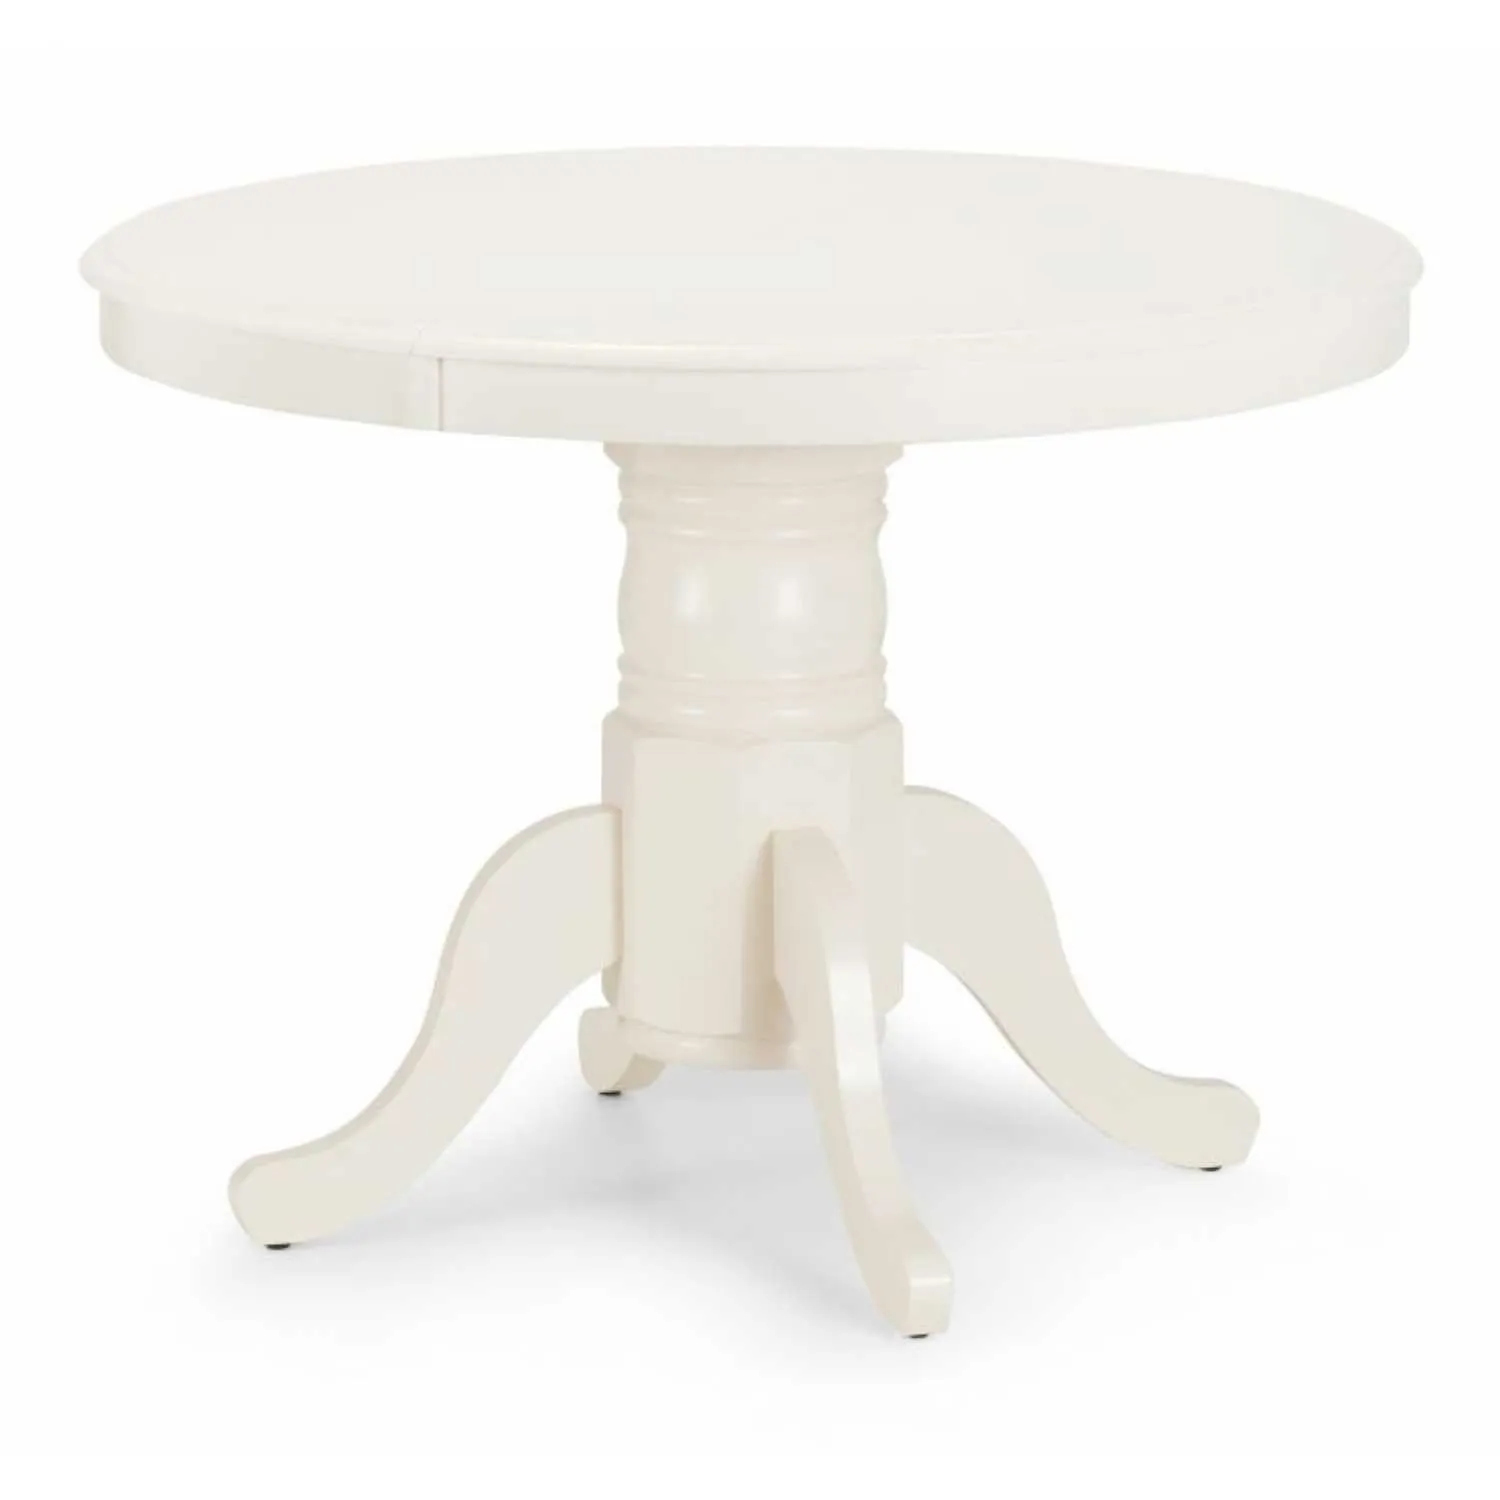 Ivory Painted Extending Dining Table Round to Oval with Single Pedestal Base